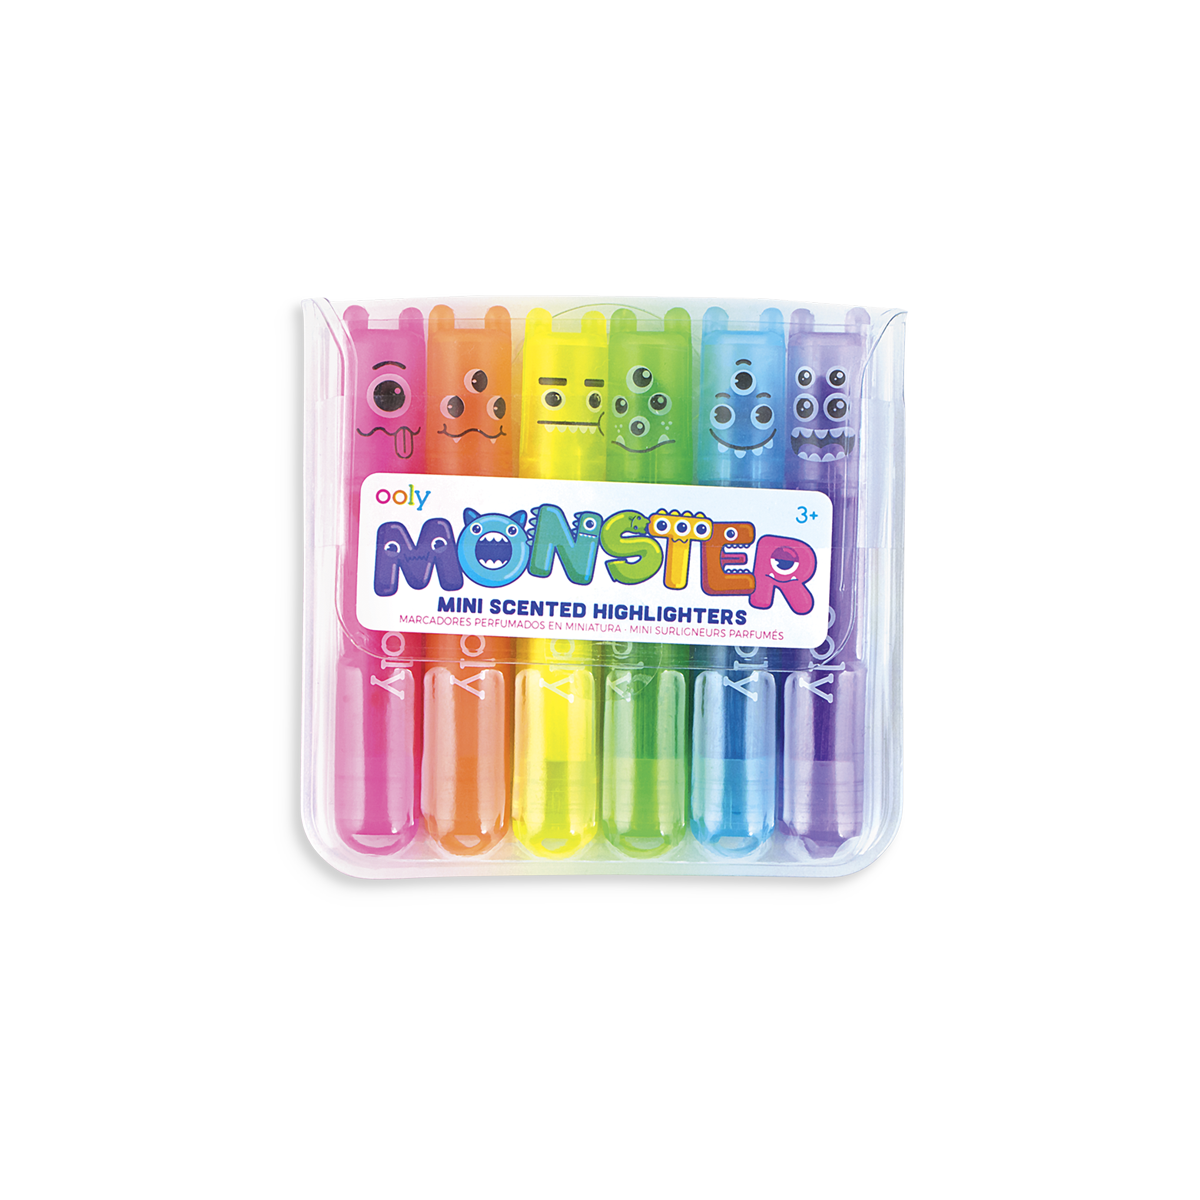 Markers & Highlighters From